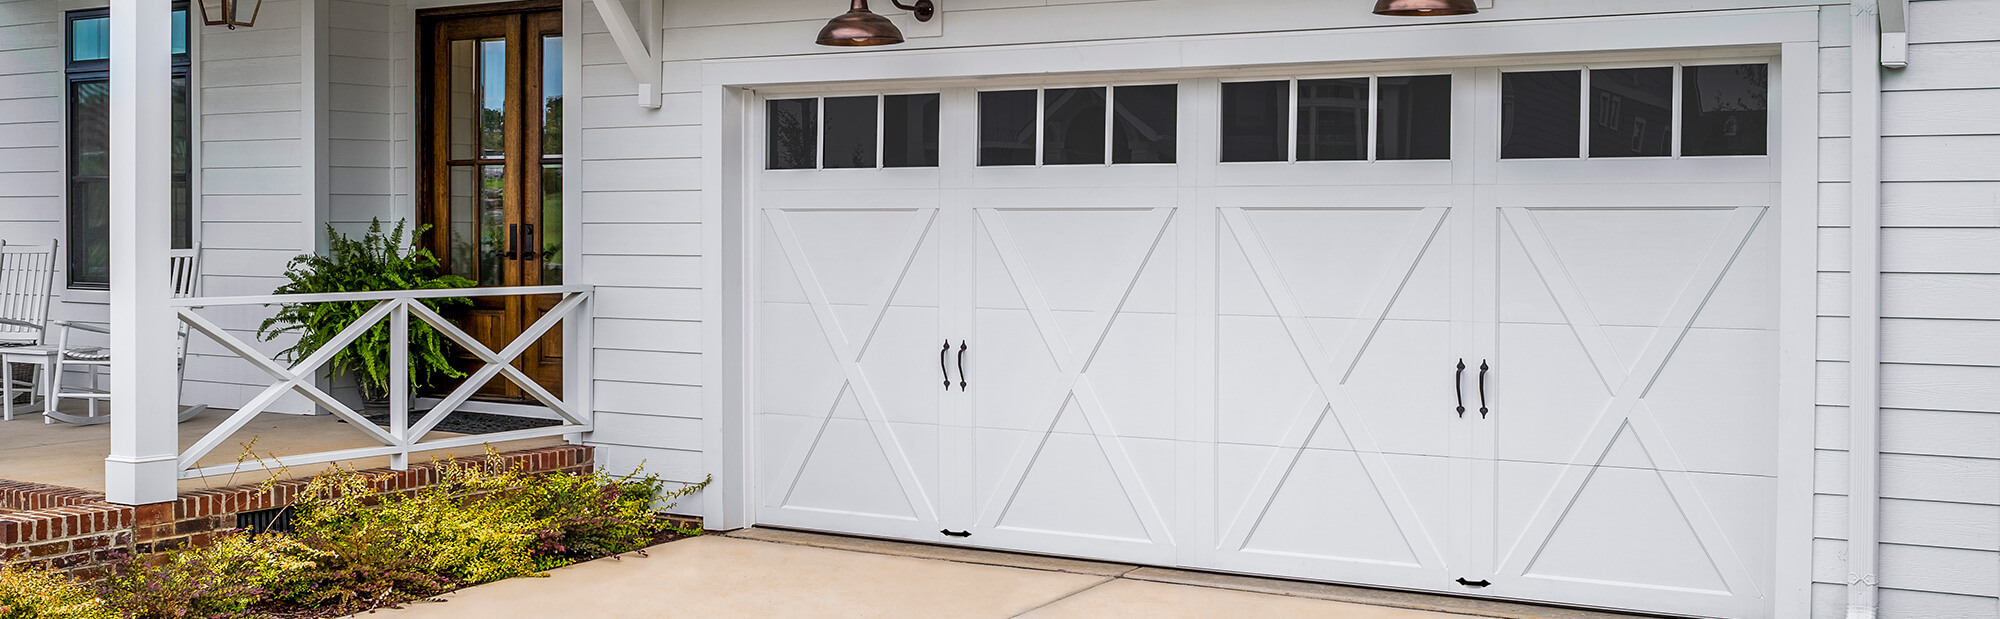  CLOPAY COACHMAN - Carriage House Garage Doors with Composite Overlay